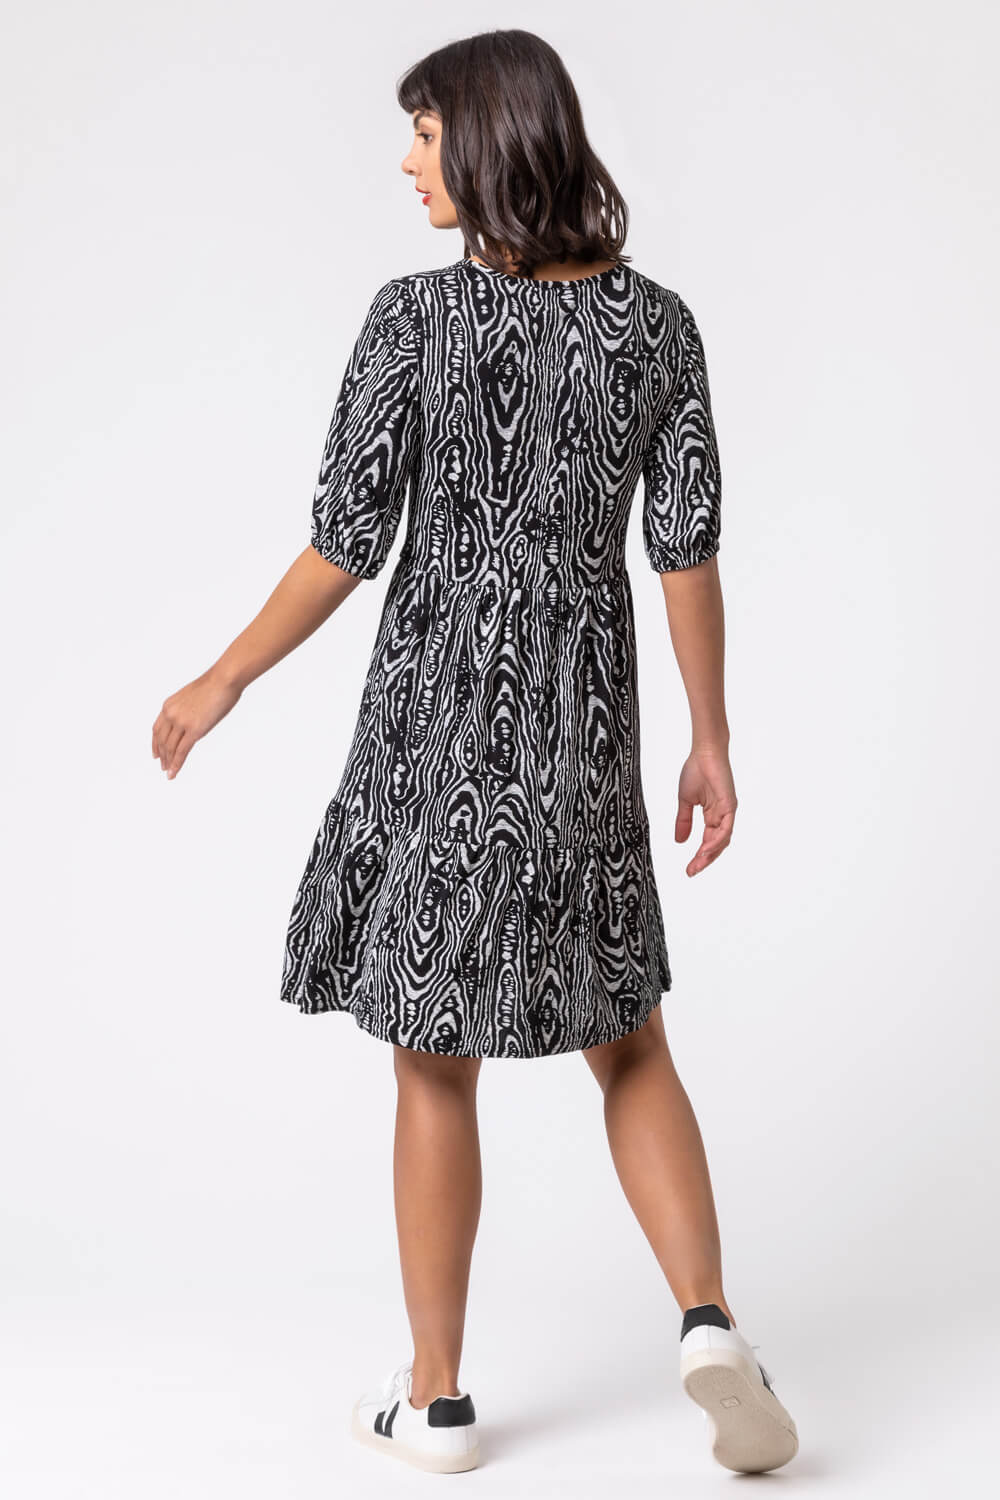 Black Animal Print Tiered Ruched Detail Dress, Image 2 of 5